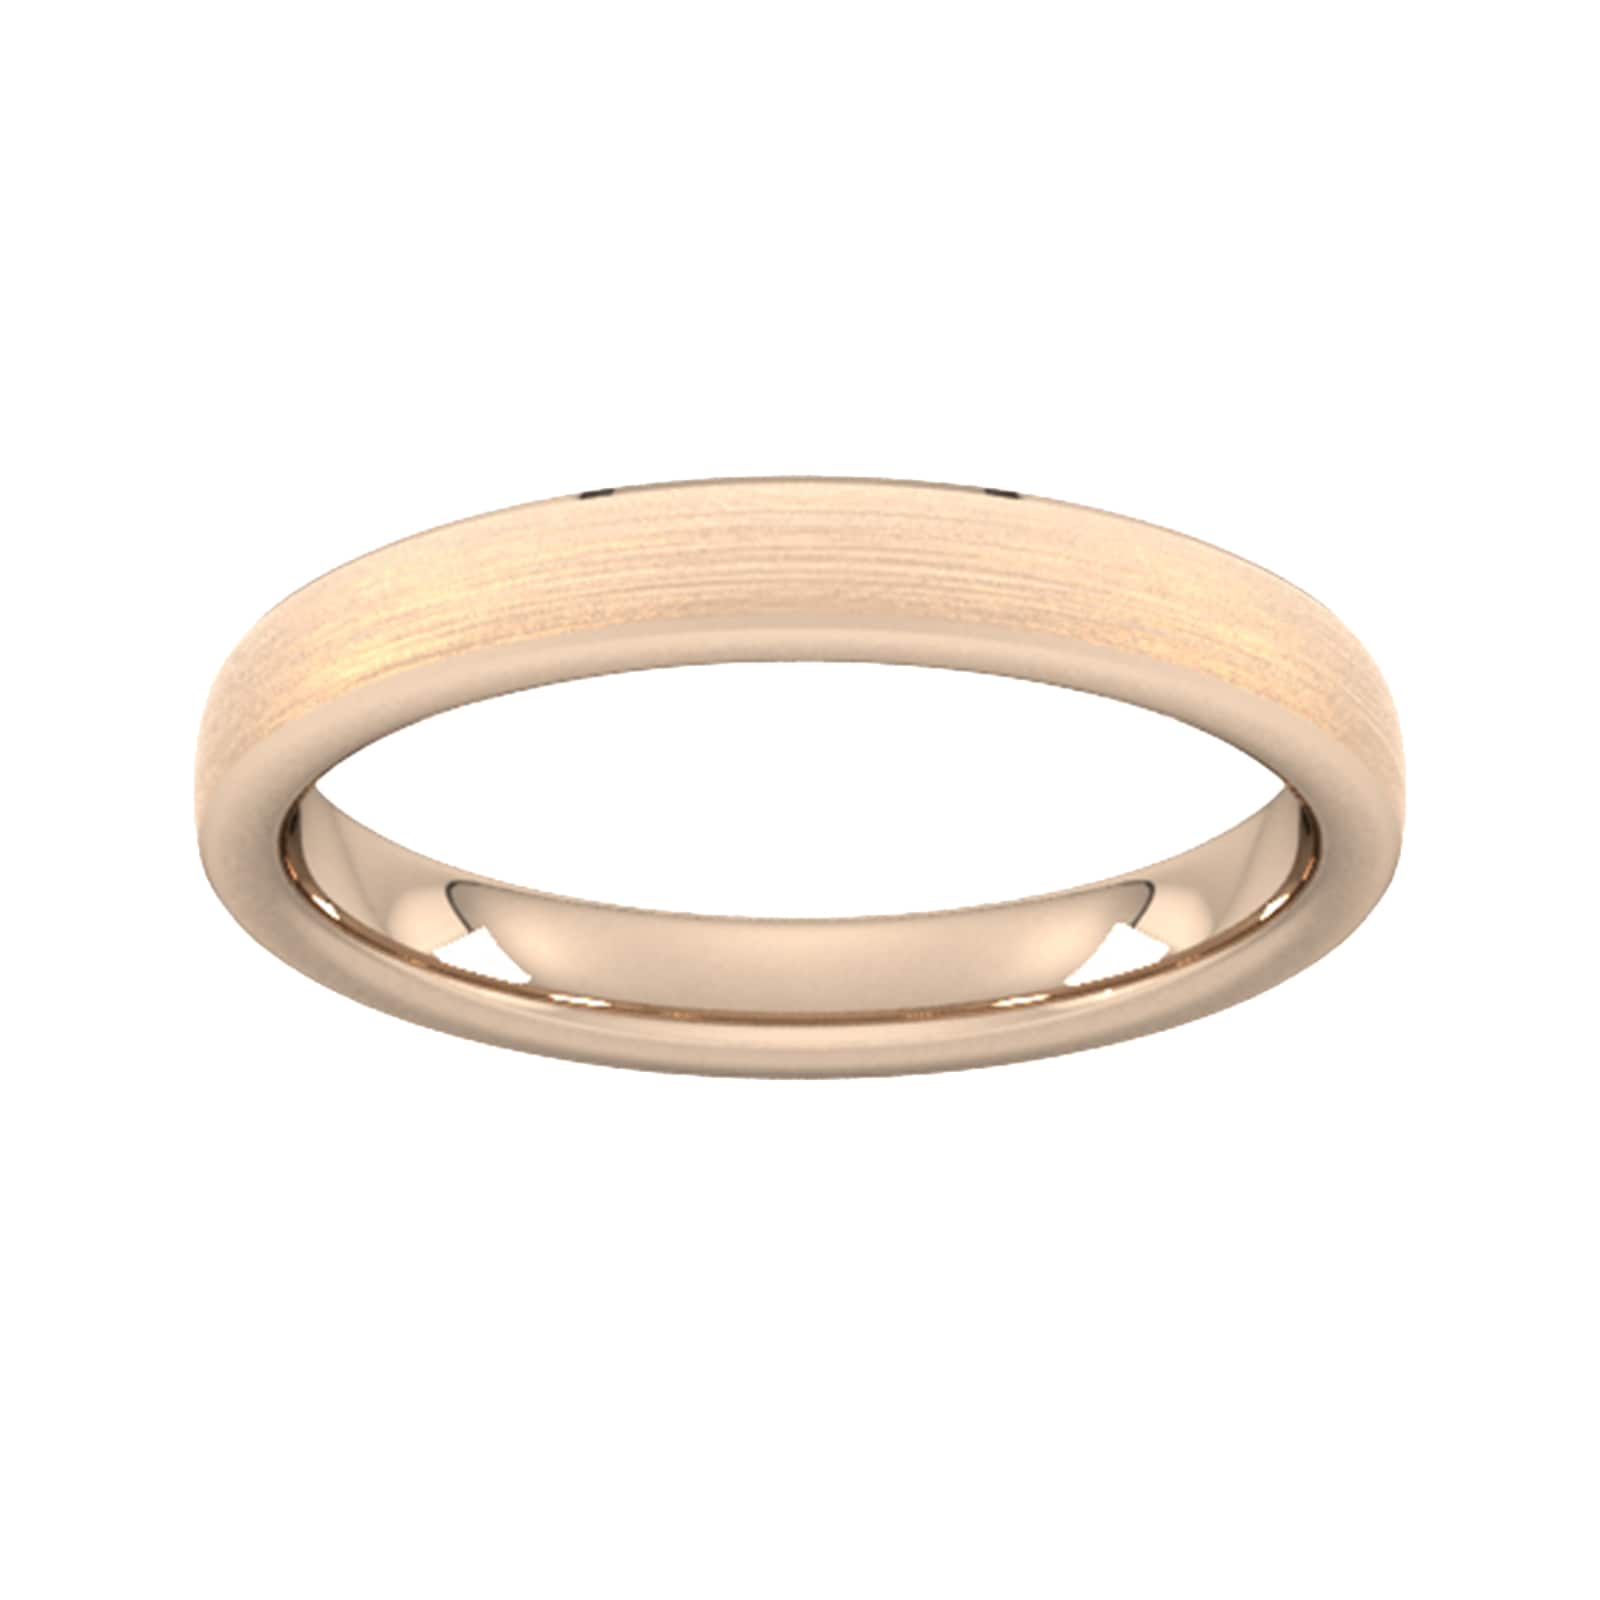 3mm D Shape Standard Polished Chamfered Edges With Matt Centre Wedding Ring In 18 Carat Rose Gold - Ring Size R